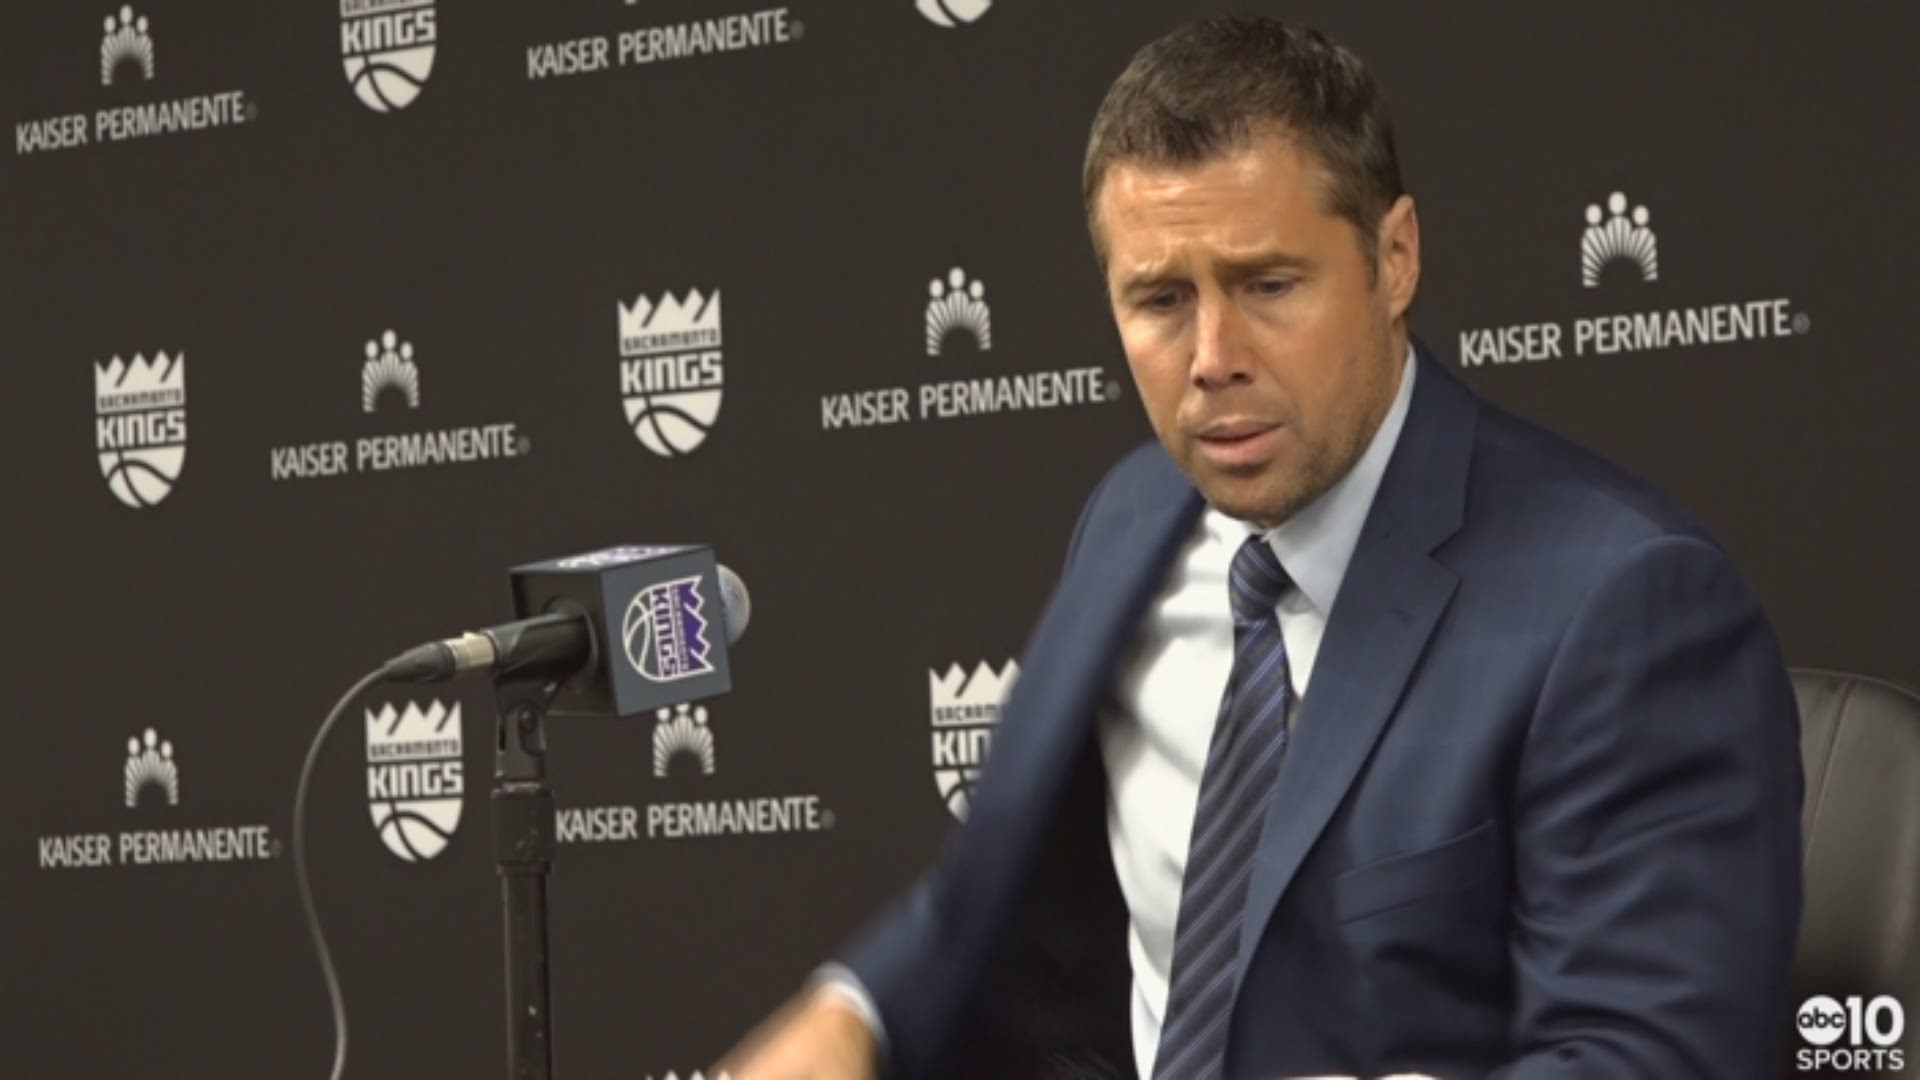 Kings head coach Dave Joerger talks about Monday's 132-100 preseason victory over Isreal's Maccabi Haifa, and how he's shortening his rotations as the NBA season draws closer.